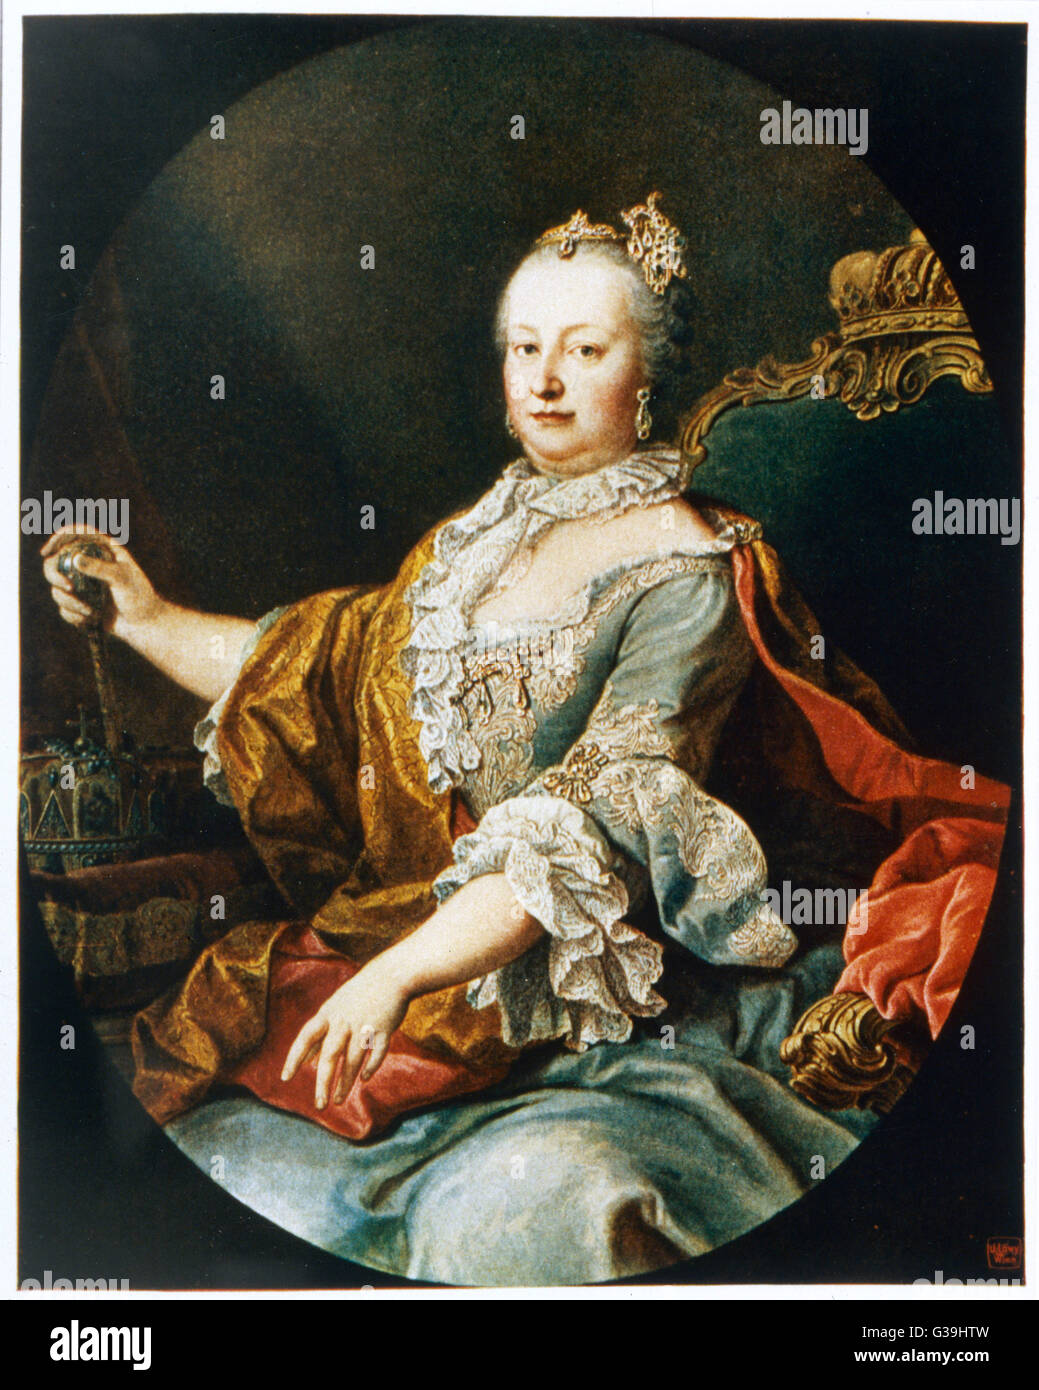 MARIA THERESIA Archduchess of Austria, Queen of Hungary and Bohemia, daughter of Emperor Carl VI, wife of Emperor Franz I, mother of Emperor Joseph II     Date: 1717 - 1780 Stock Photo